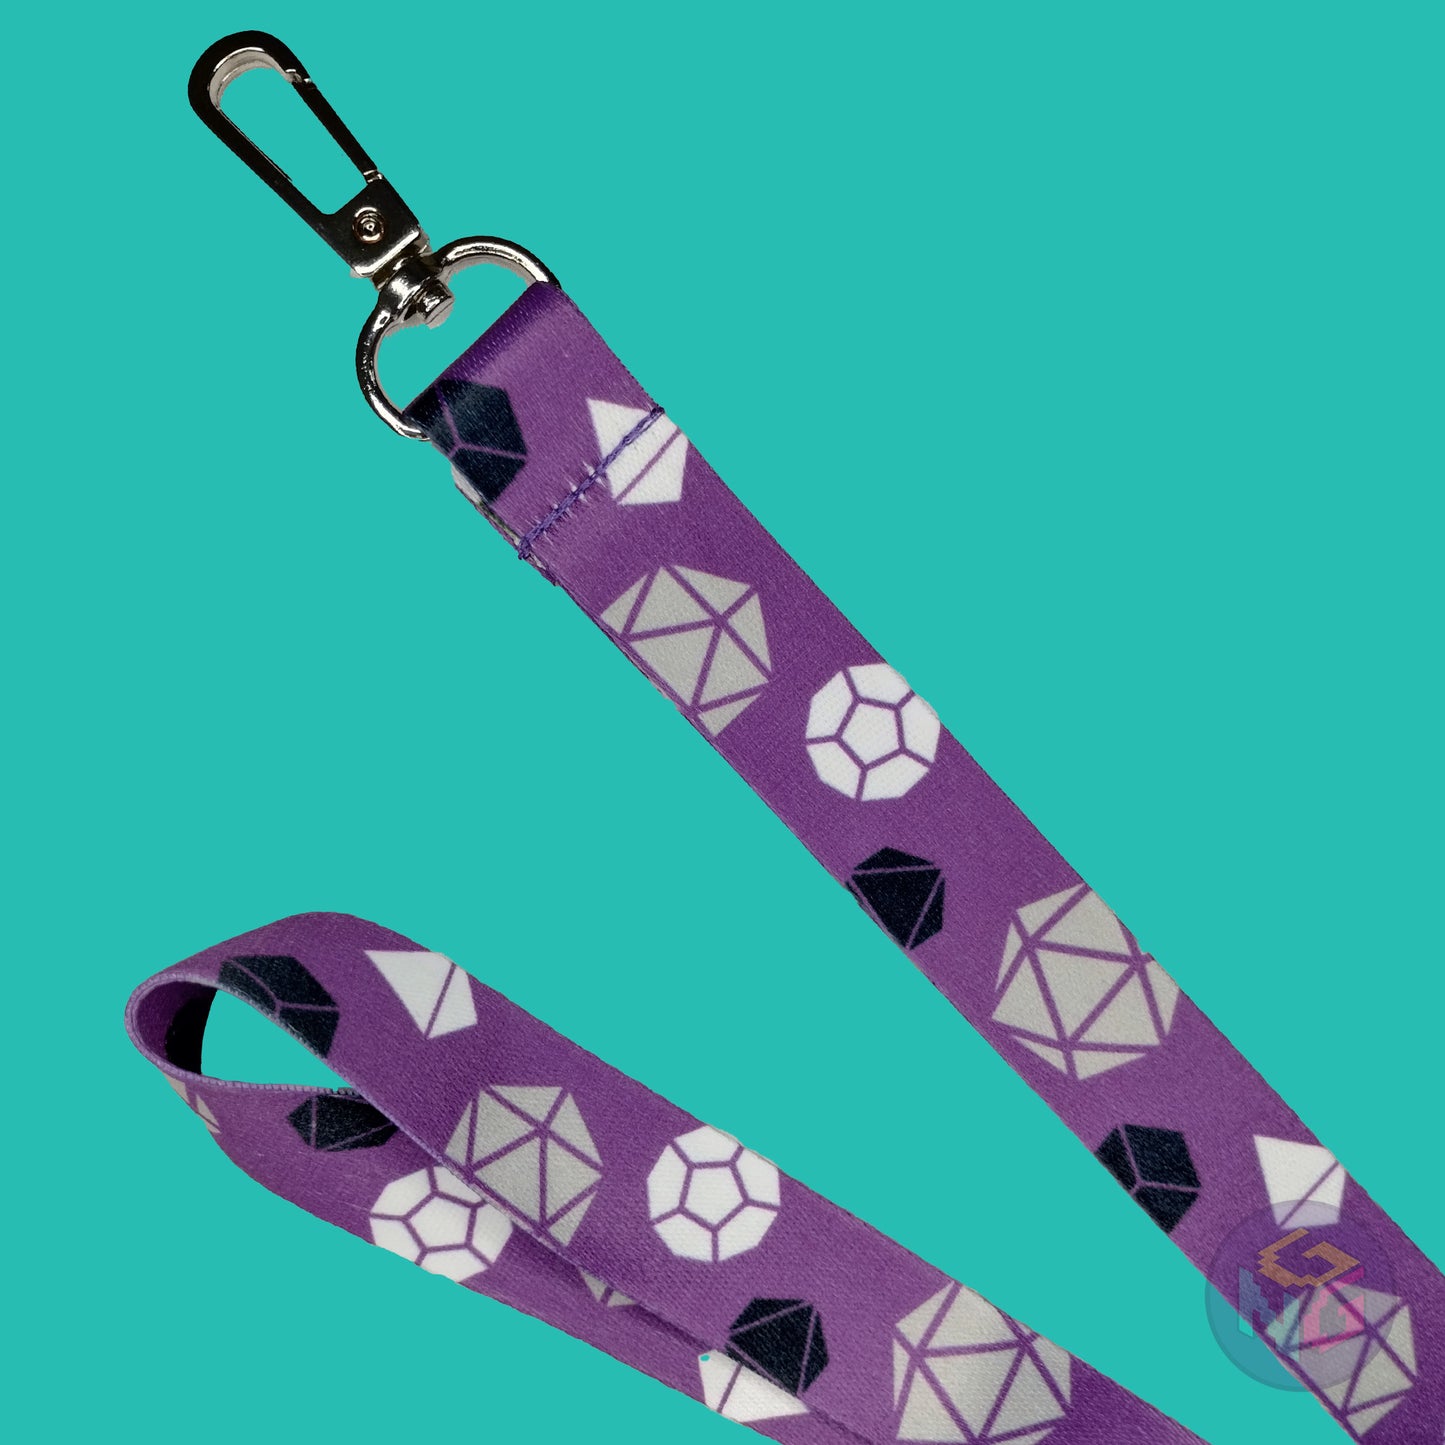 close up detail of the asexual dungeons and dragons lanyard showing the lobster clasp, grey d20s, black d6s, white d4s, and other dice